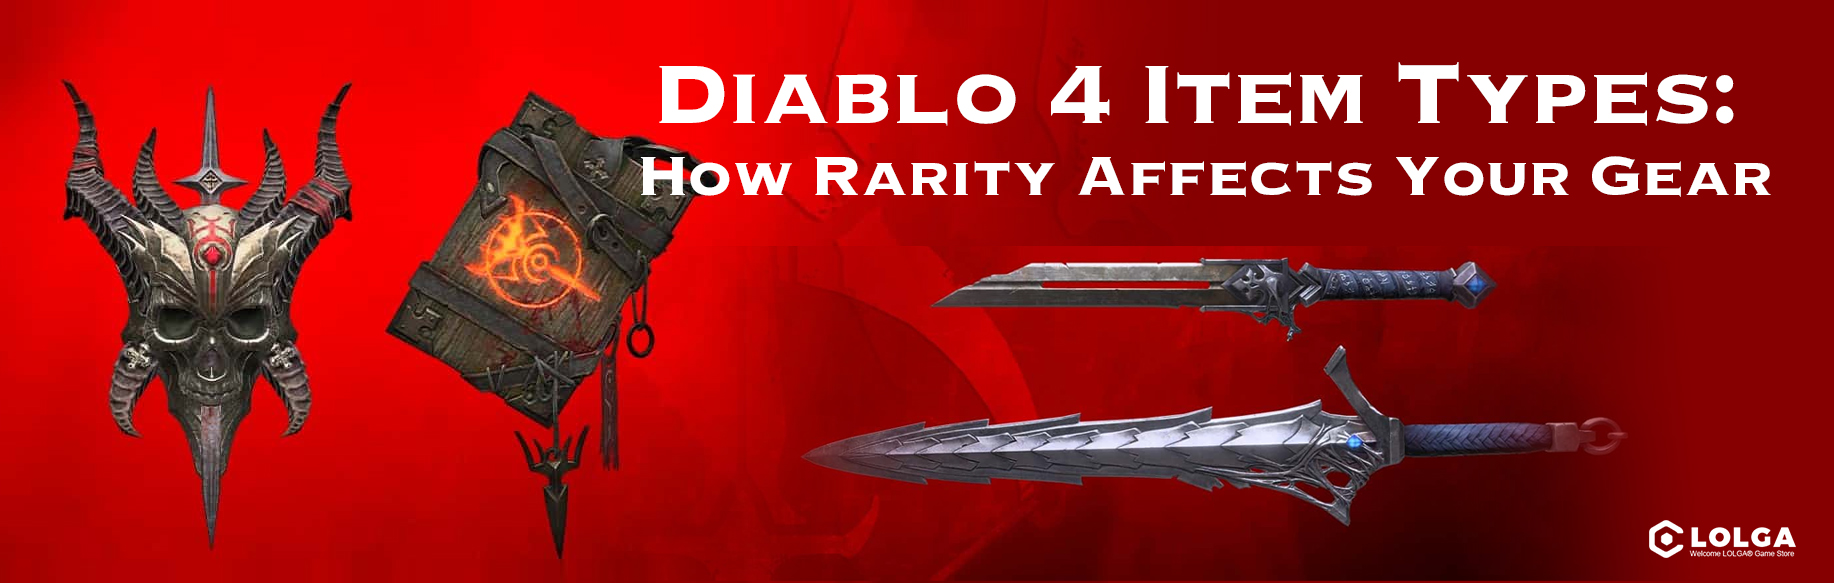 Diablo 4 Item Types: How Rarity Affects Your Gear